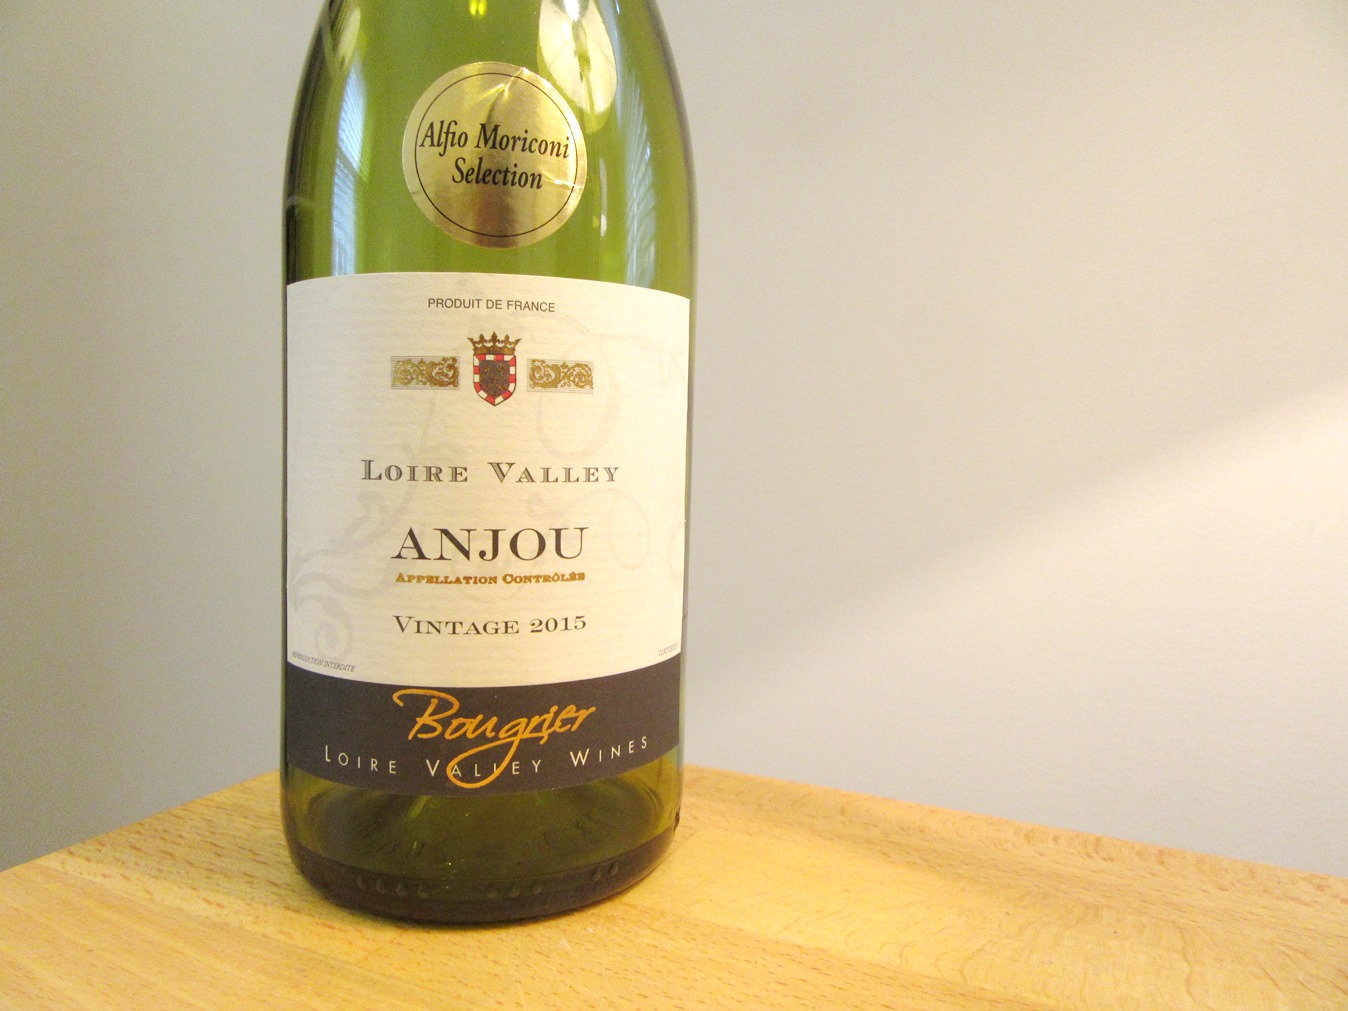 Bougrier, Anjou Blanc 2015, Loire Valley, France, wine casual